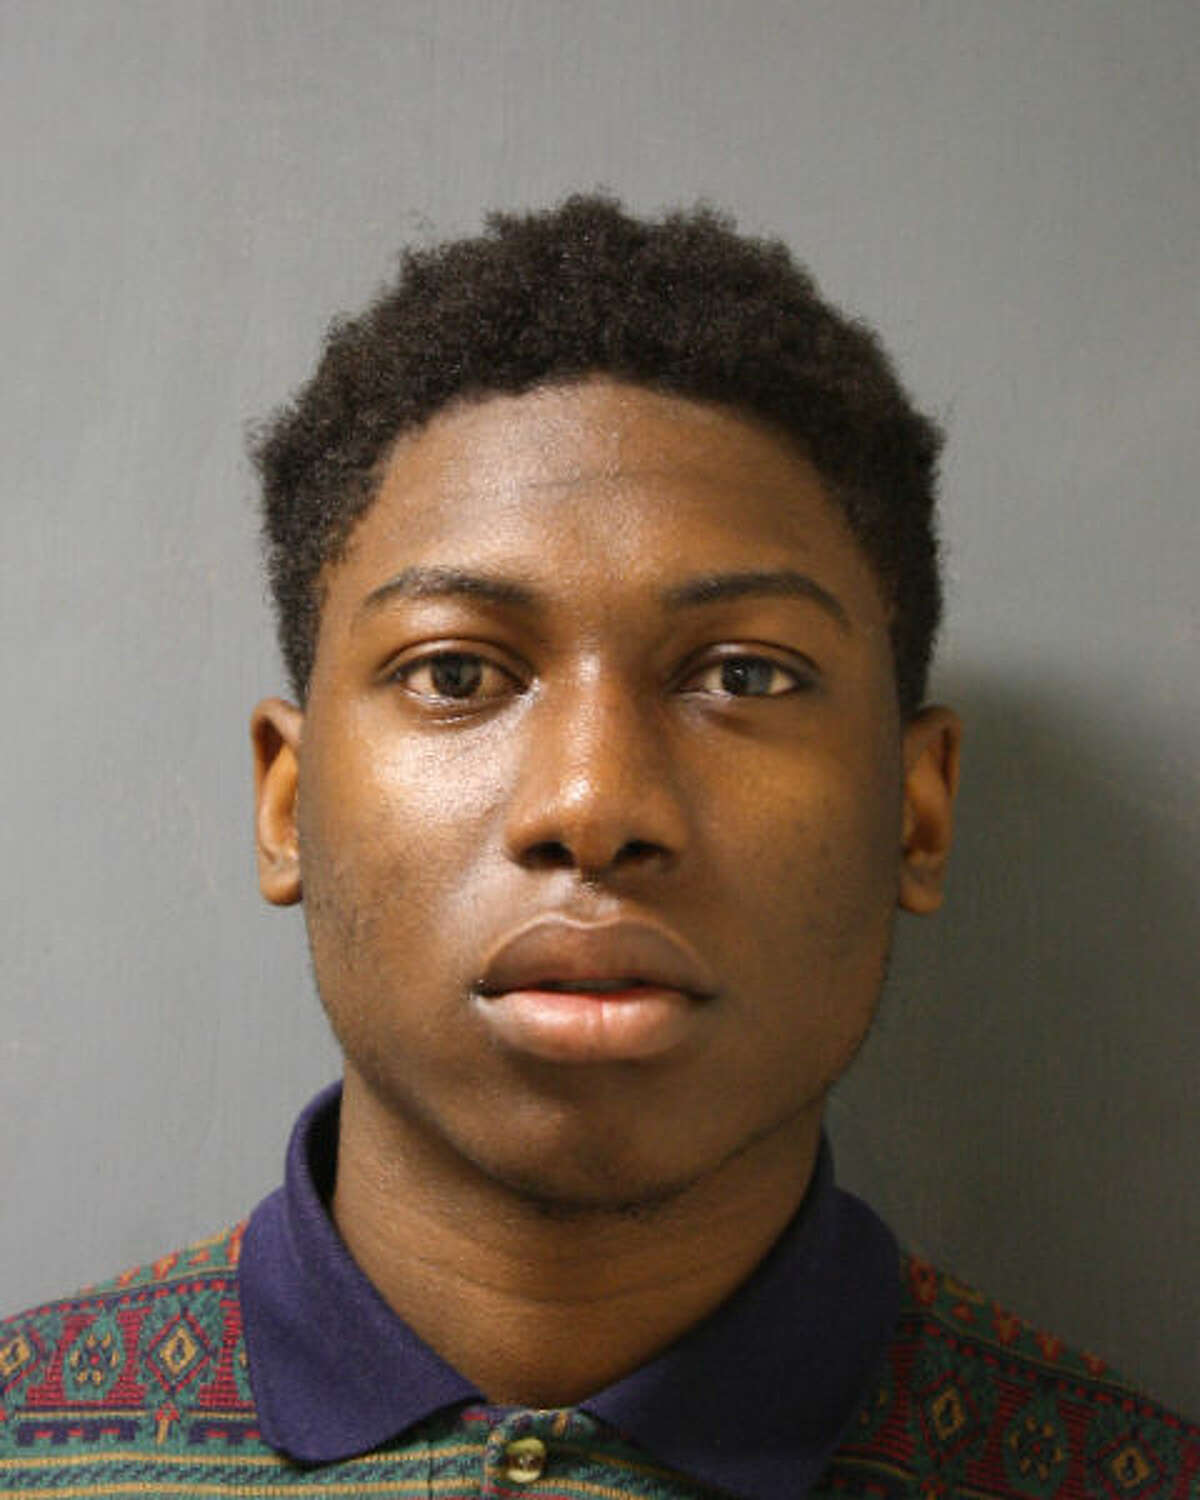 Clinton Onyeahialam, 19, is charged with sexual assault in connection with the alleged rape of girl who identified herself as Jada at a house party in the 12500 block of Chessington near Stafford, according to the Houston Police Department.